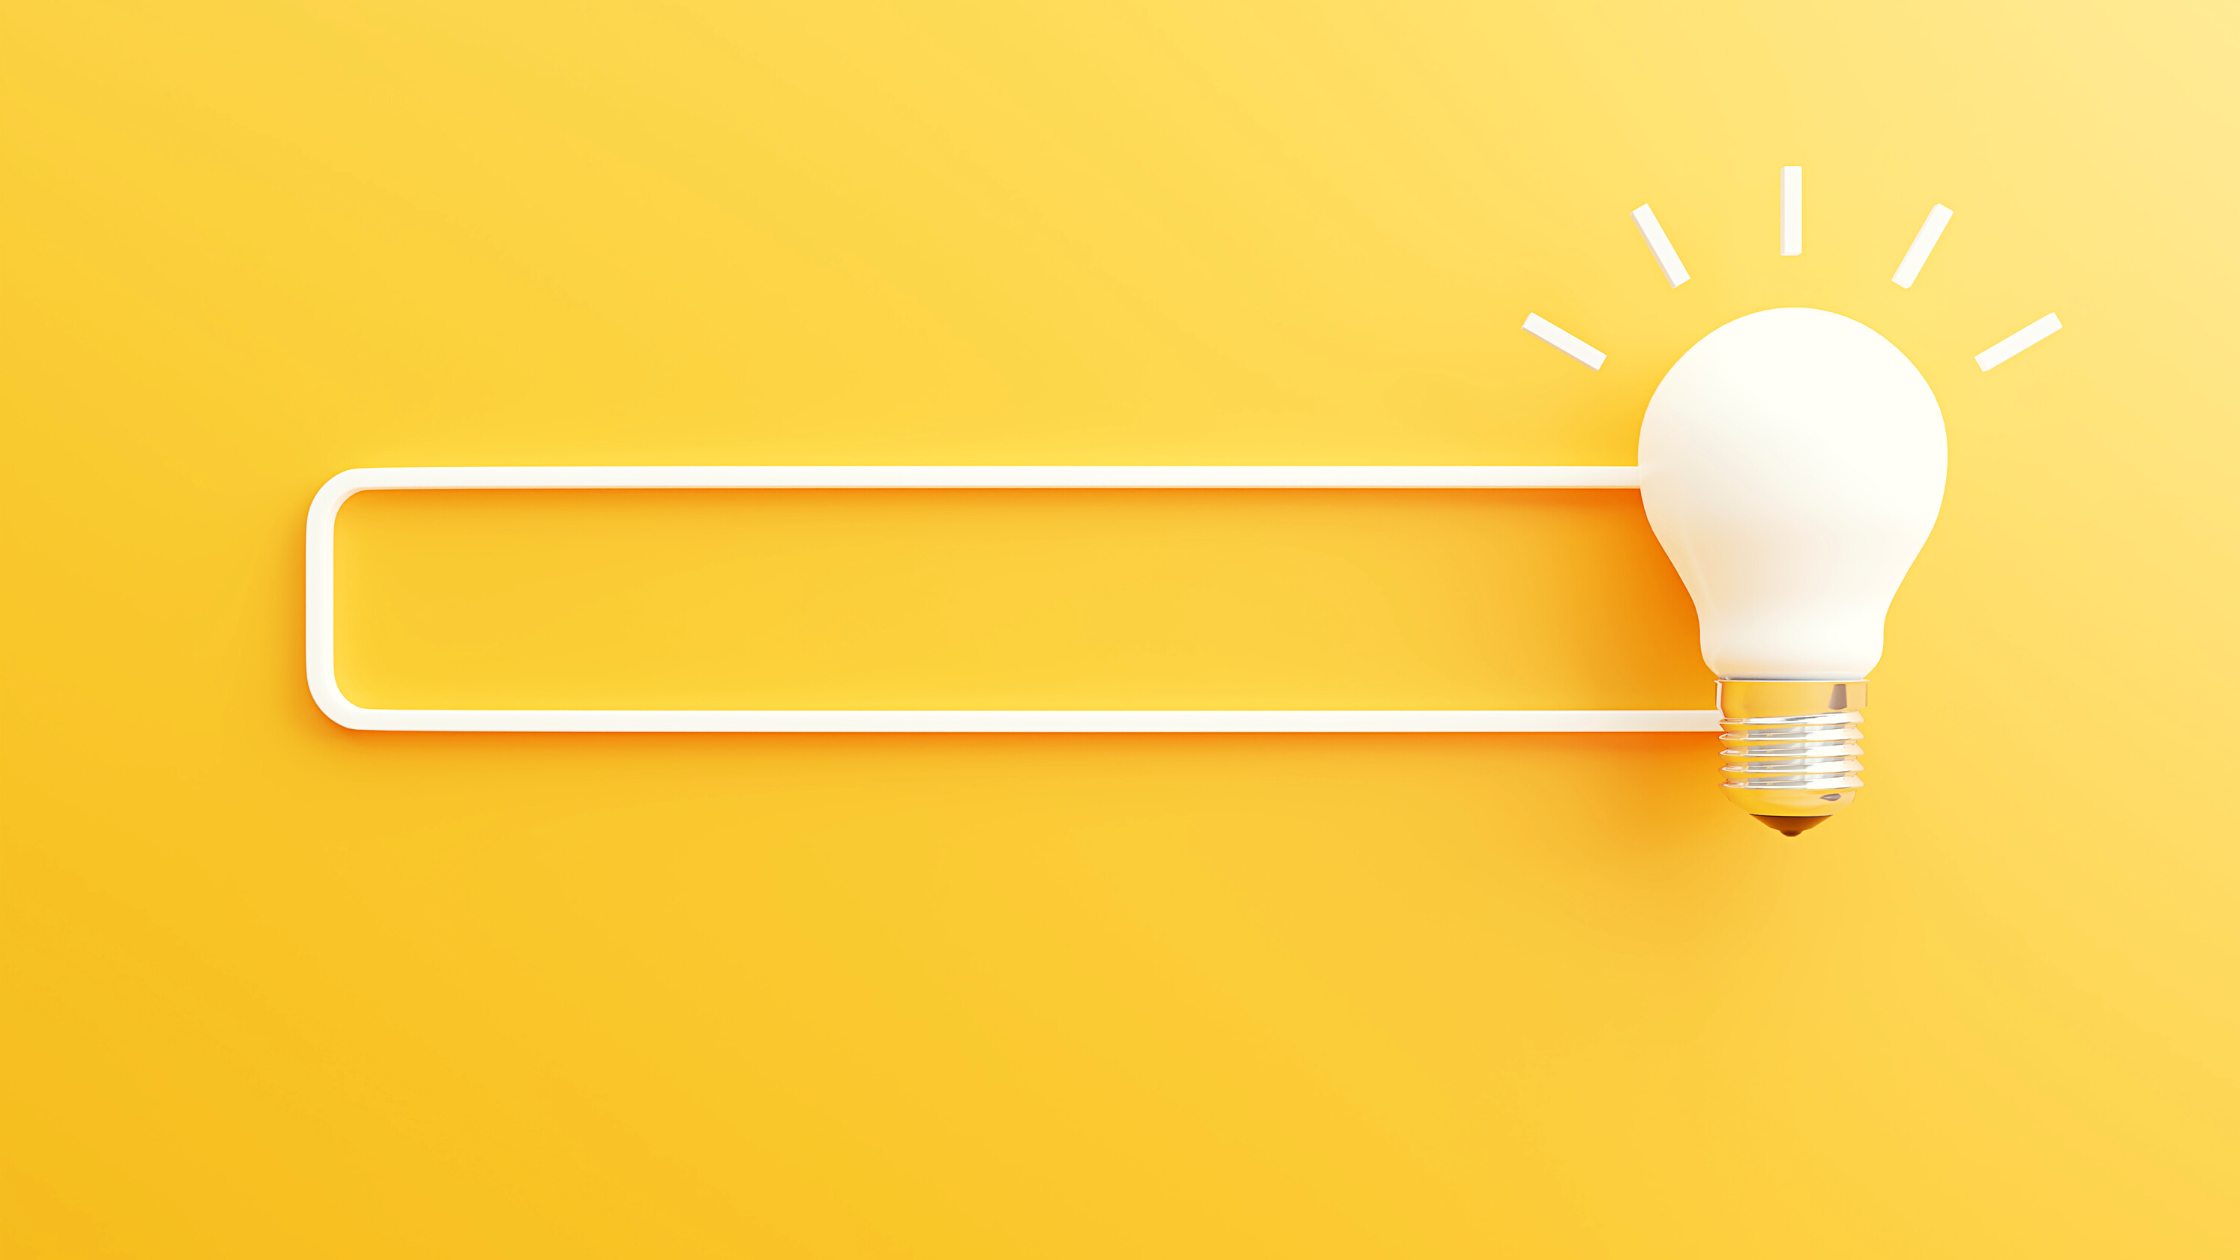 search bar and light bulb against yellow background